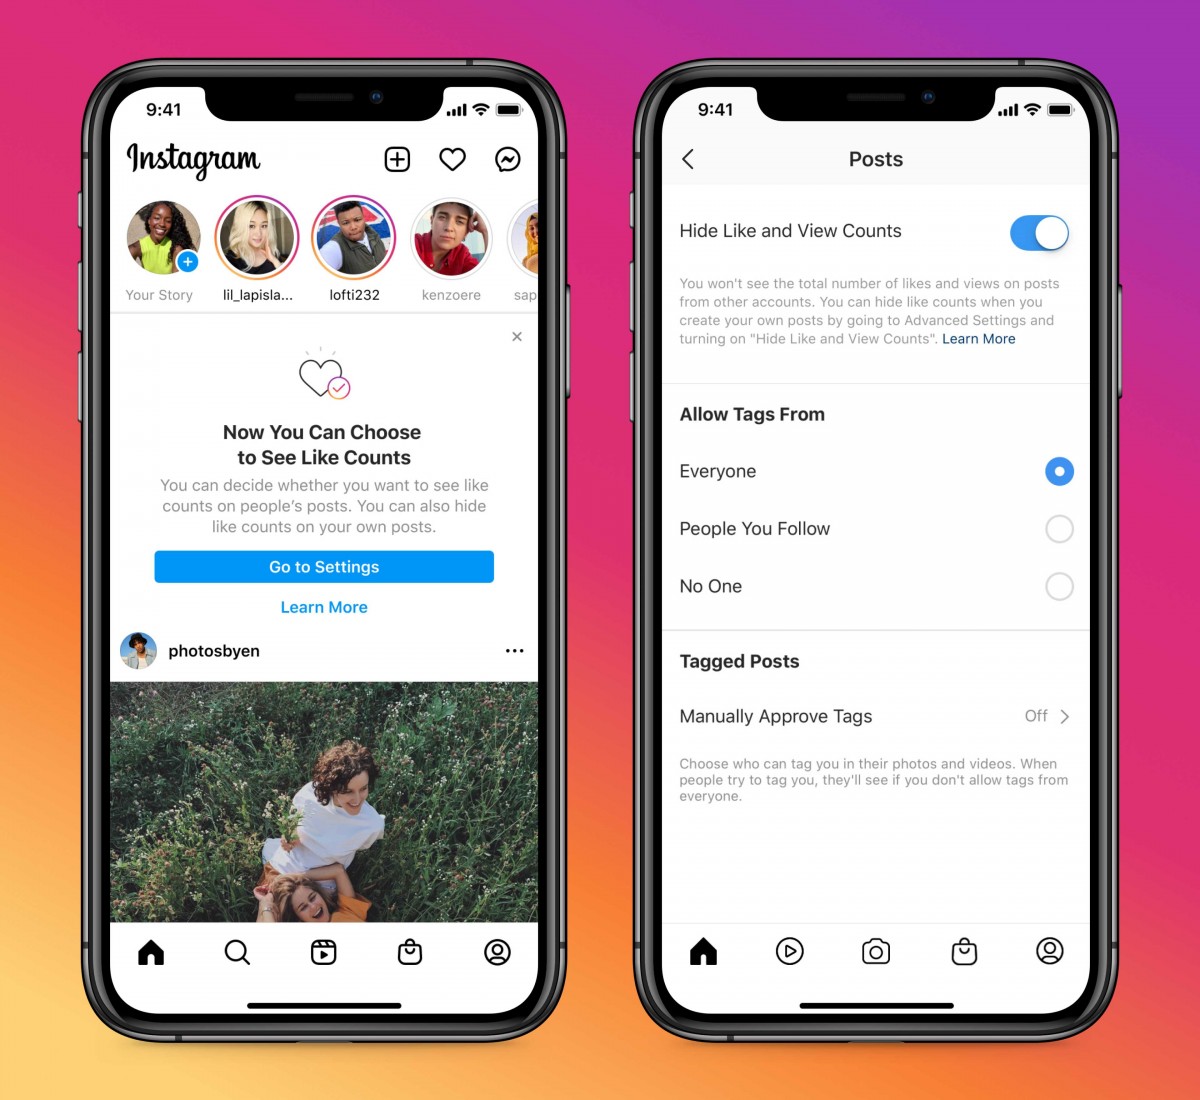 Instagram brings back Like count as an opt-in feature